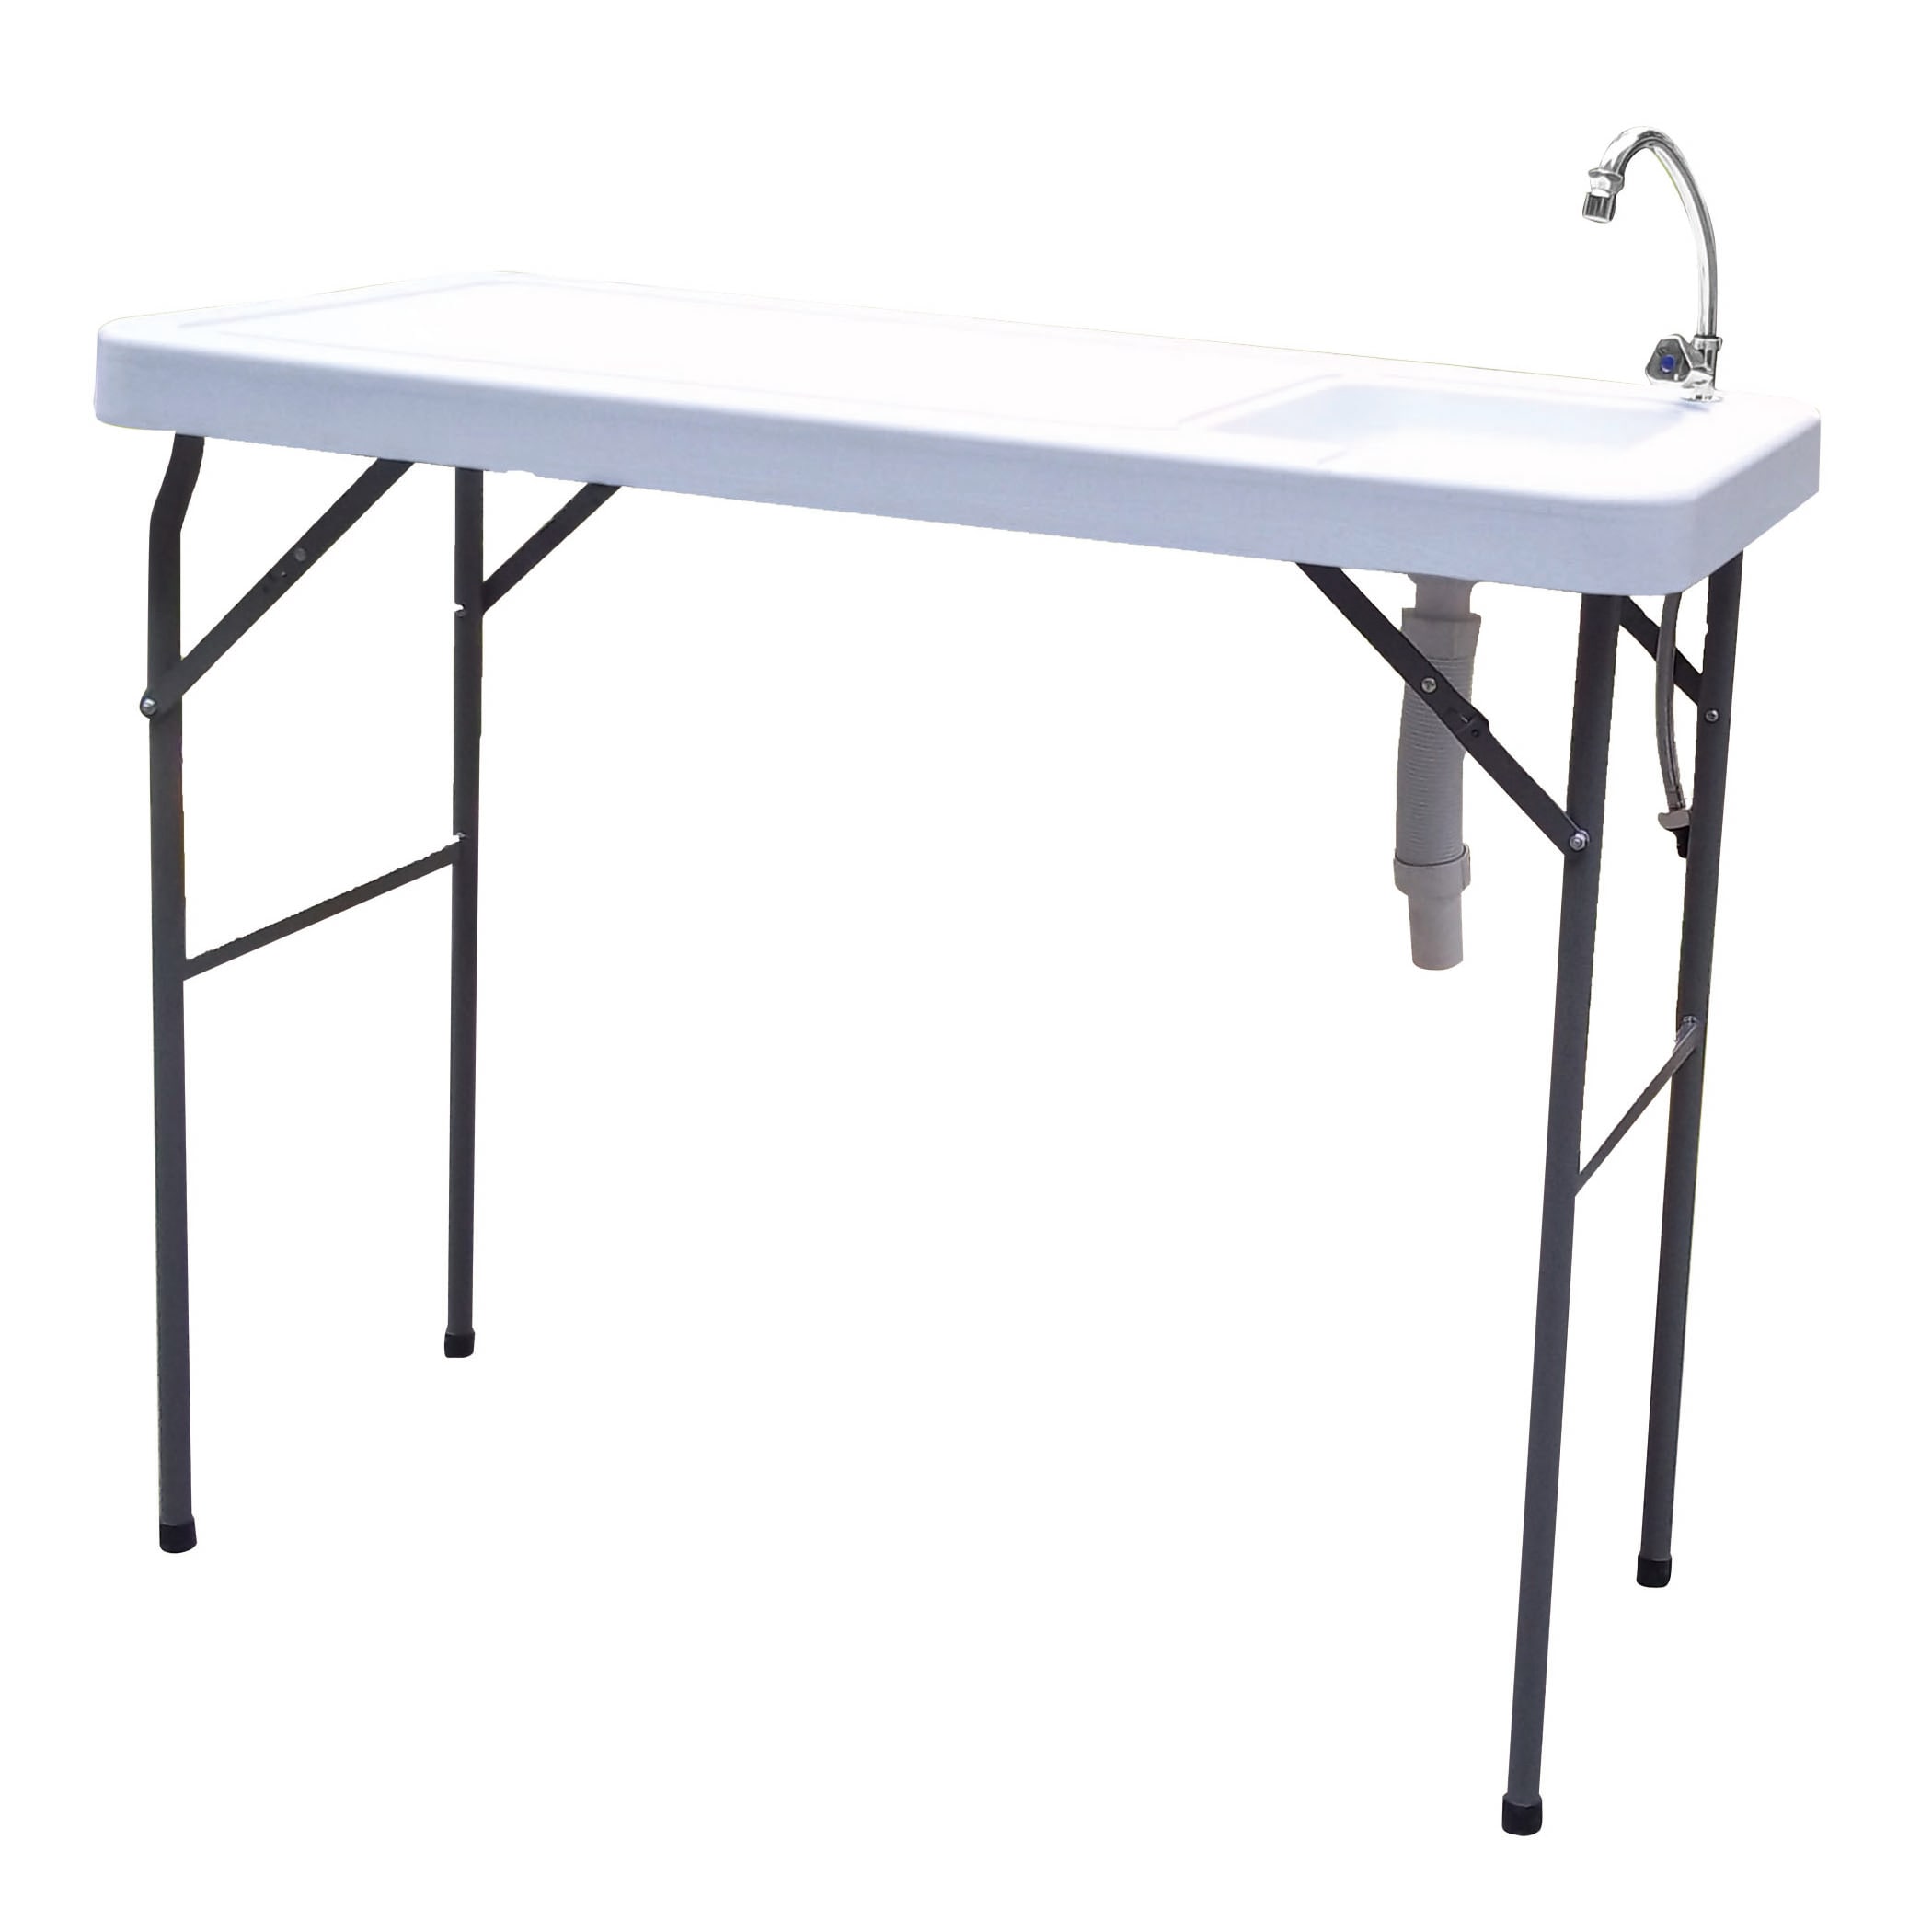 Bayfeve Outdoor Fish and Game Cutting Cleaning Table with Sink and